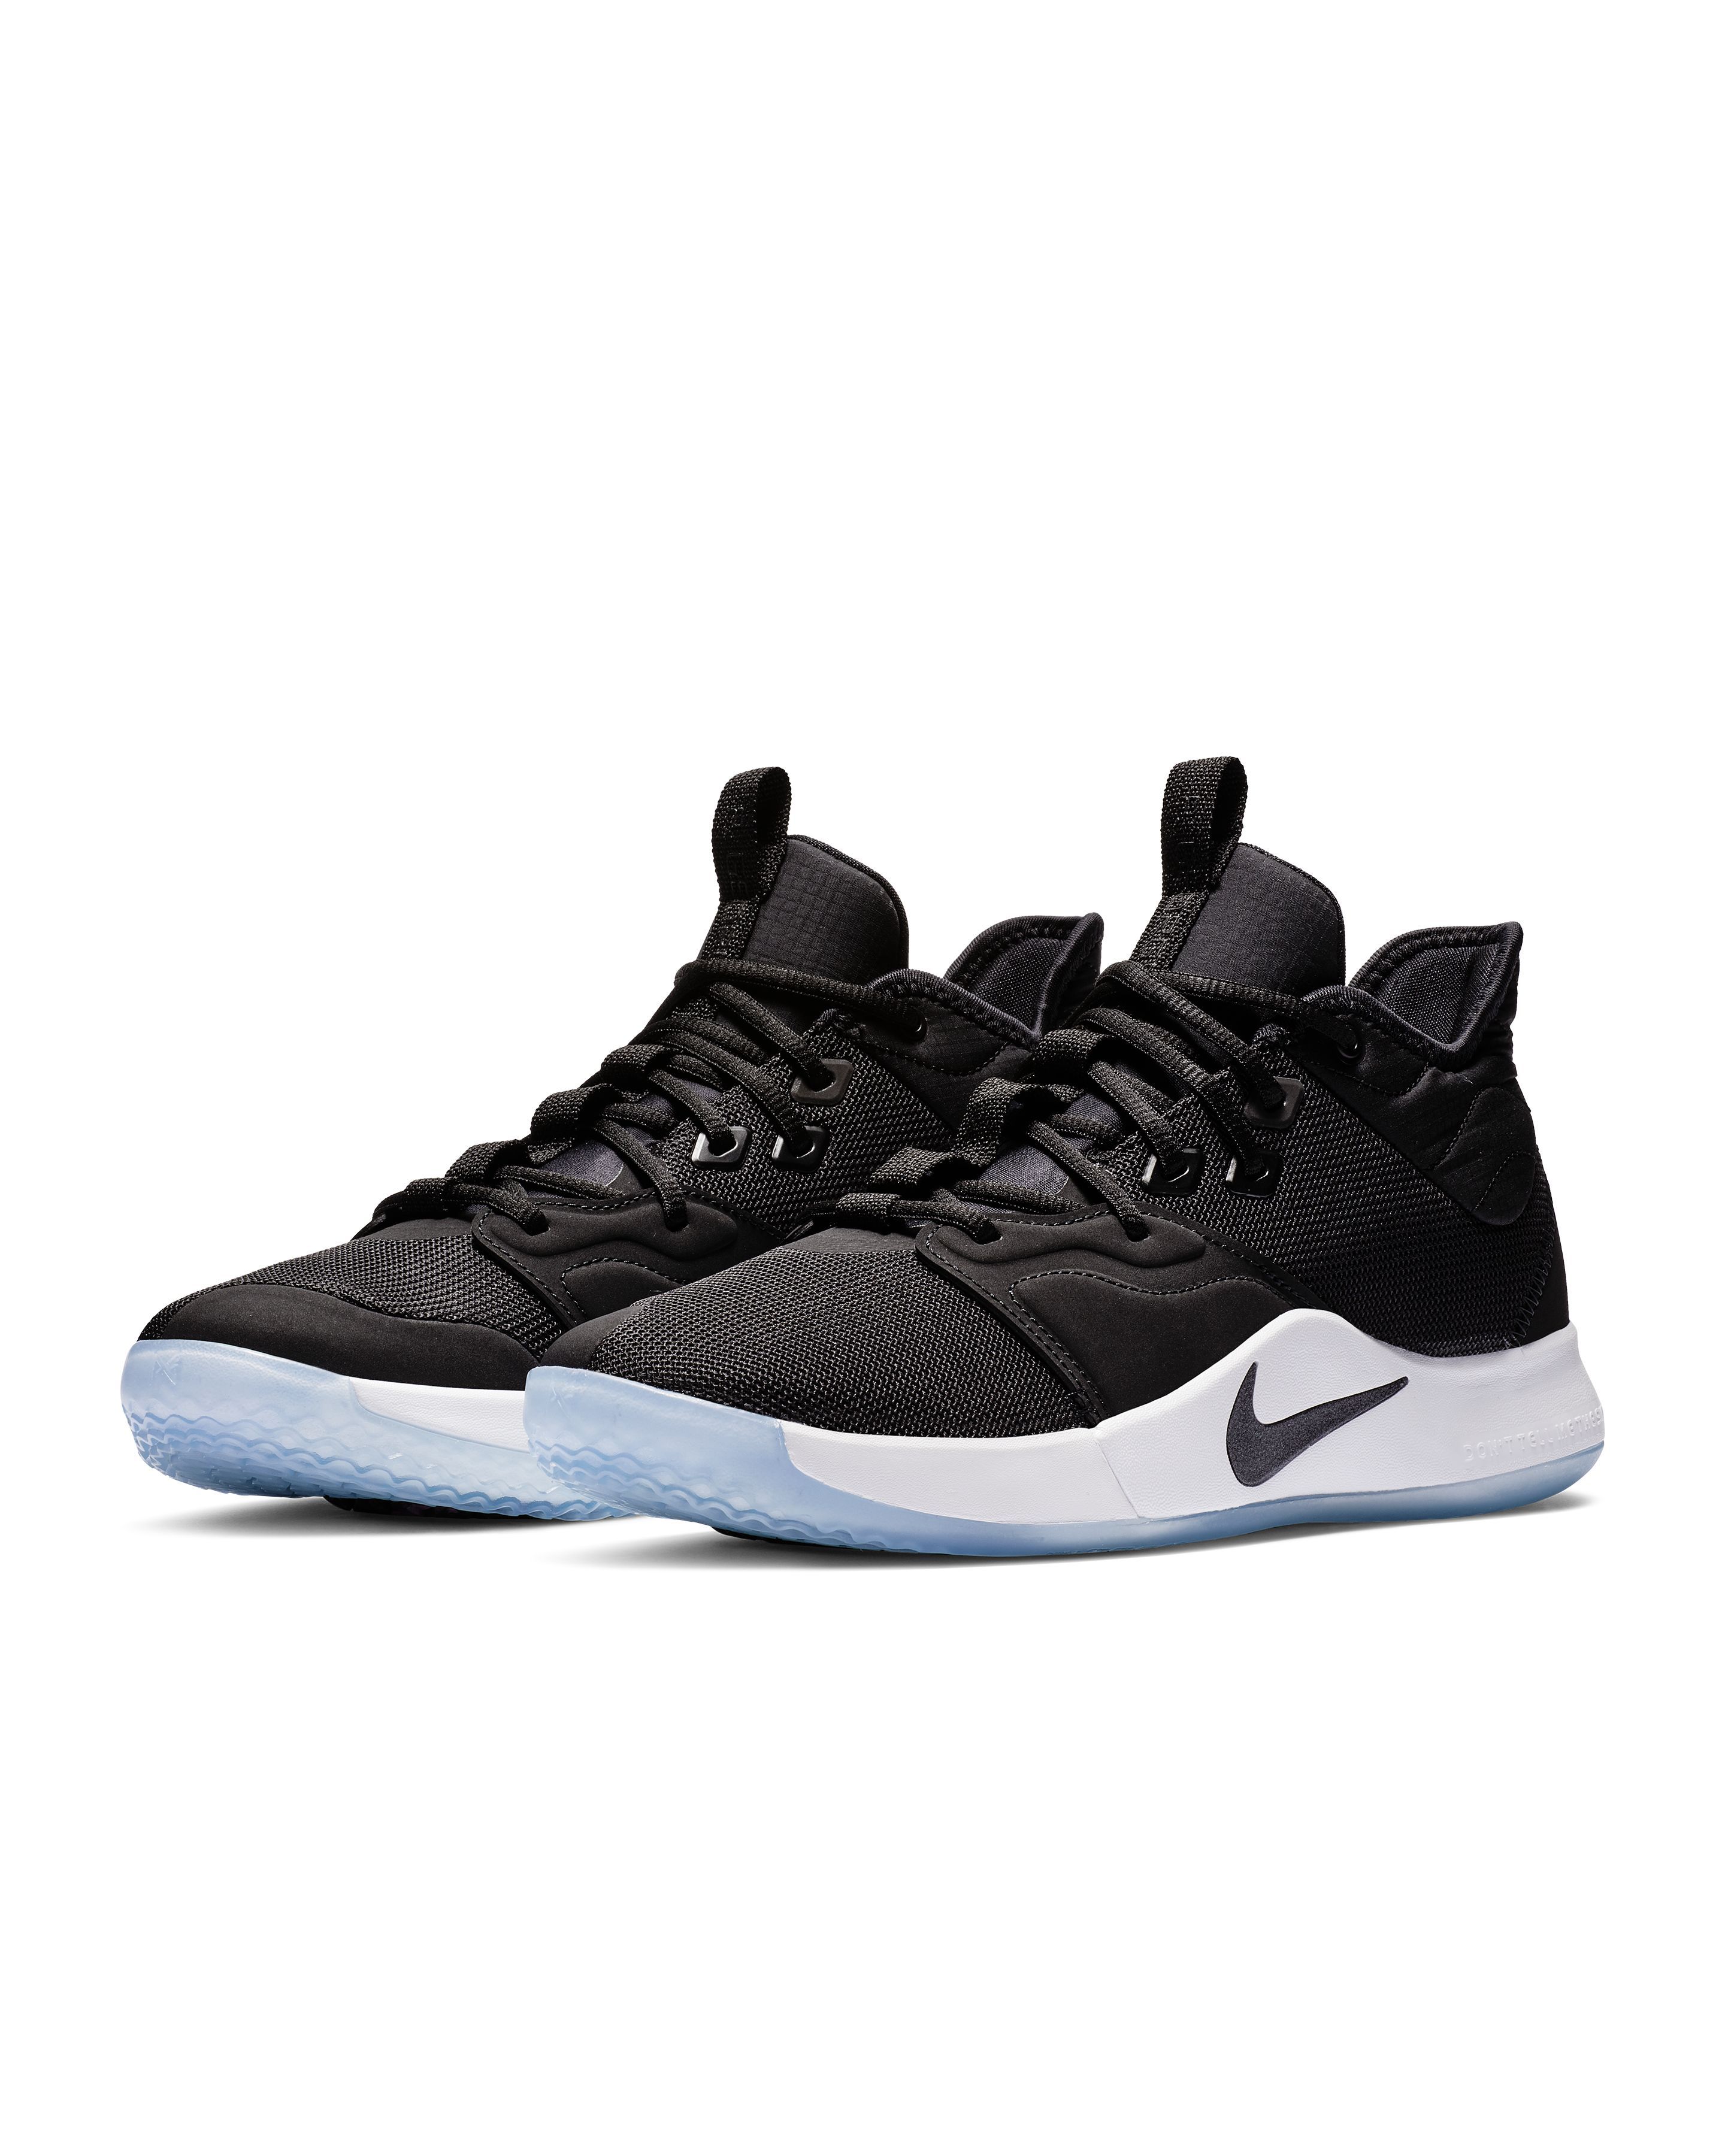 16 Best Pairs of Basketball Shoes for 